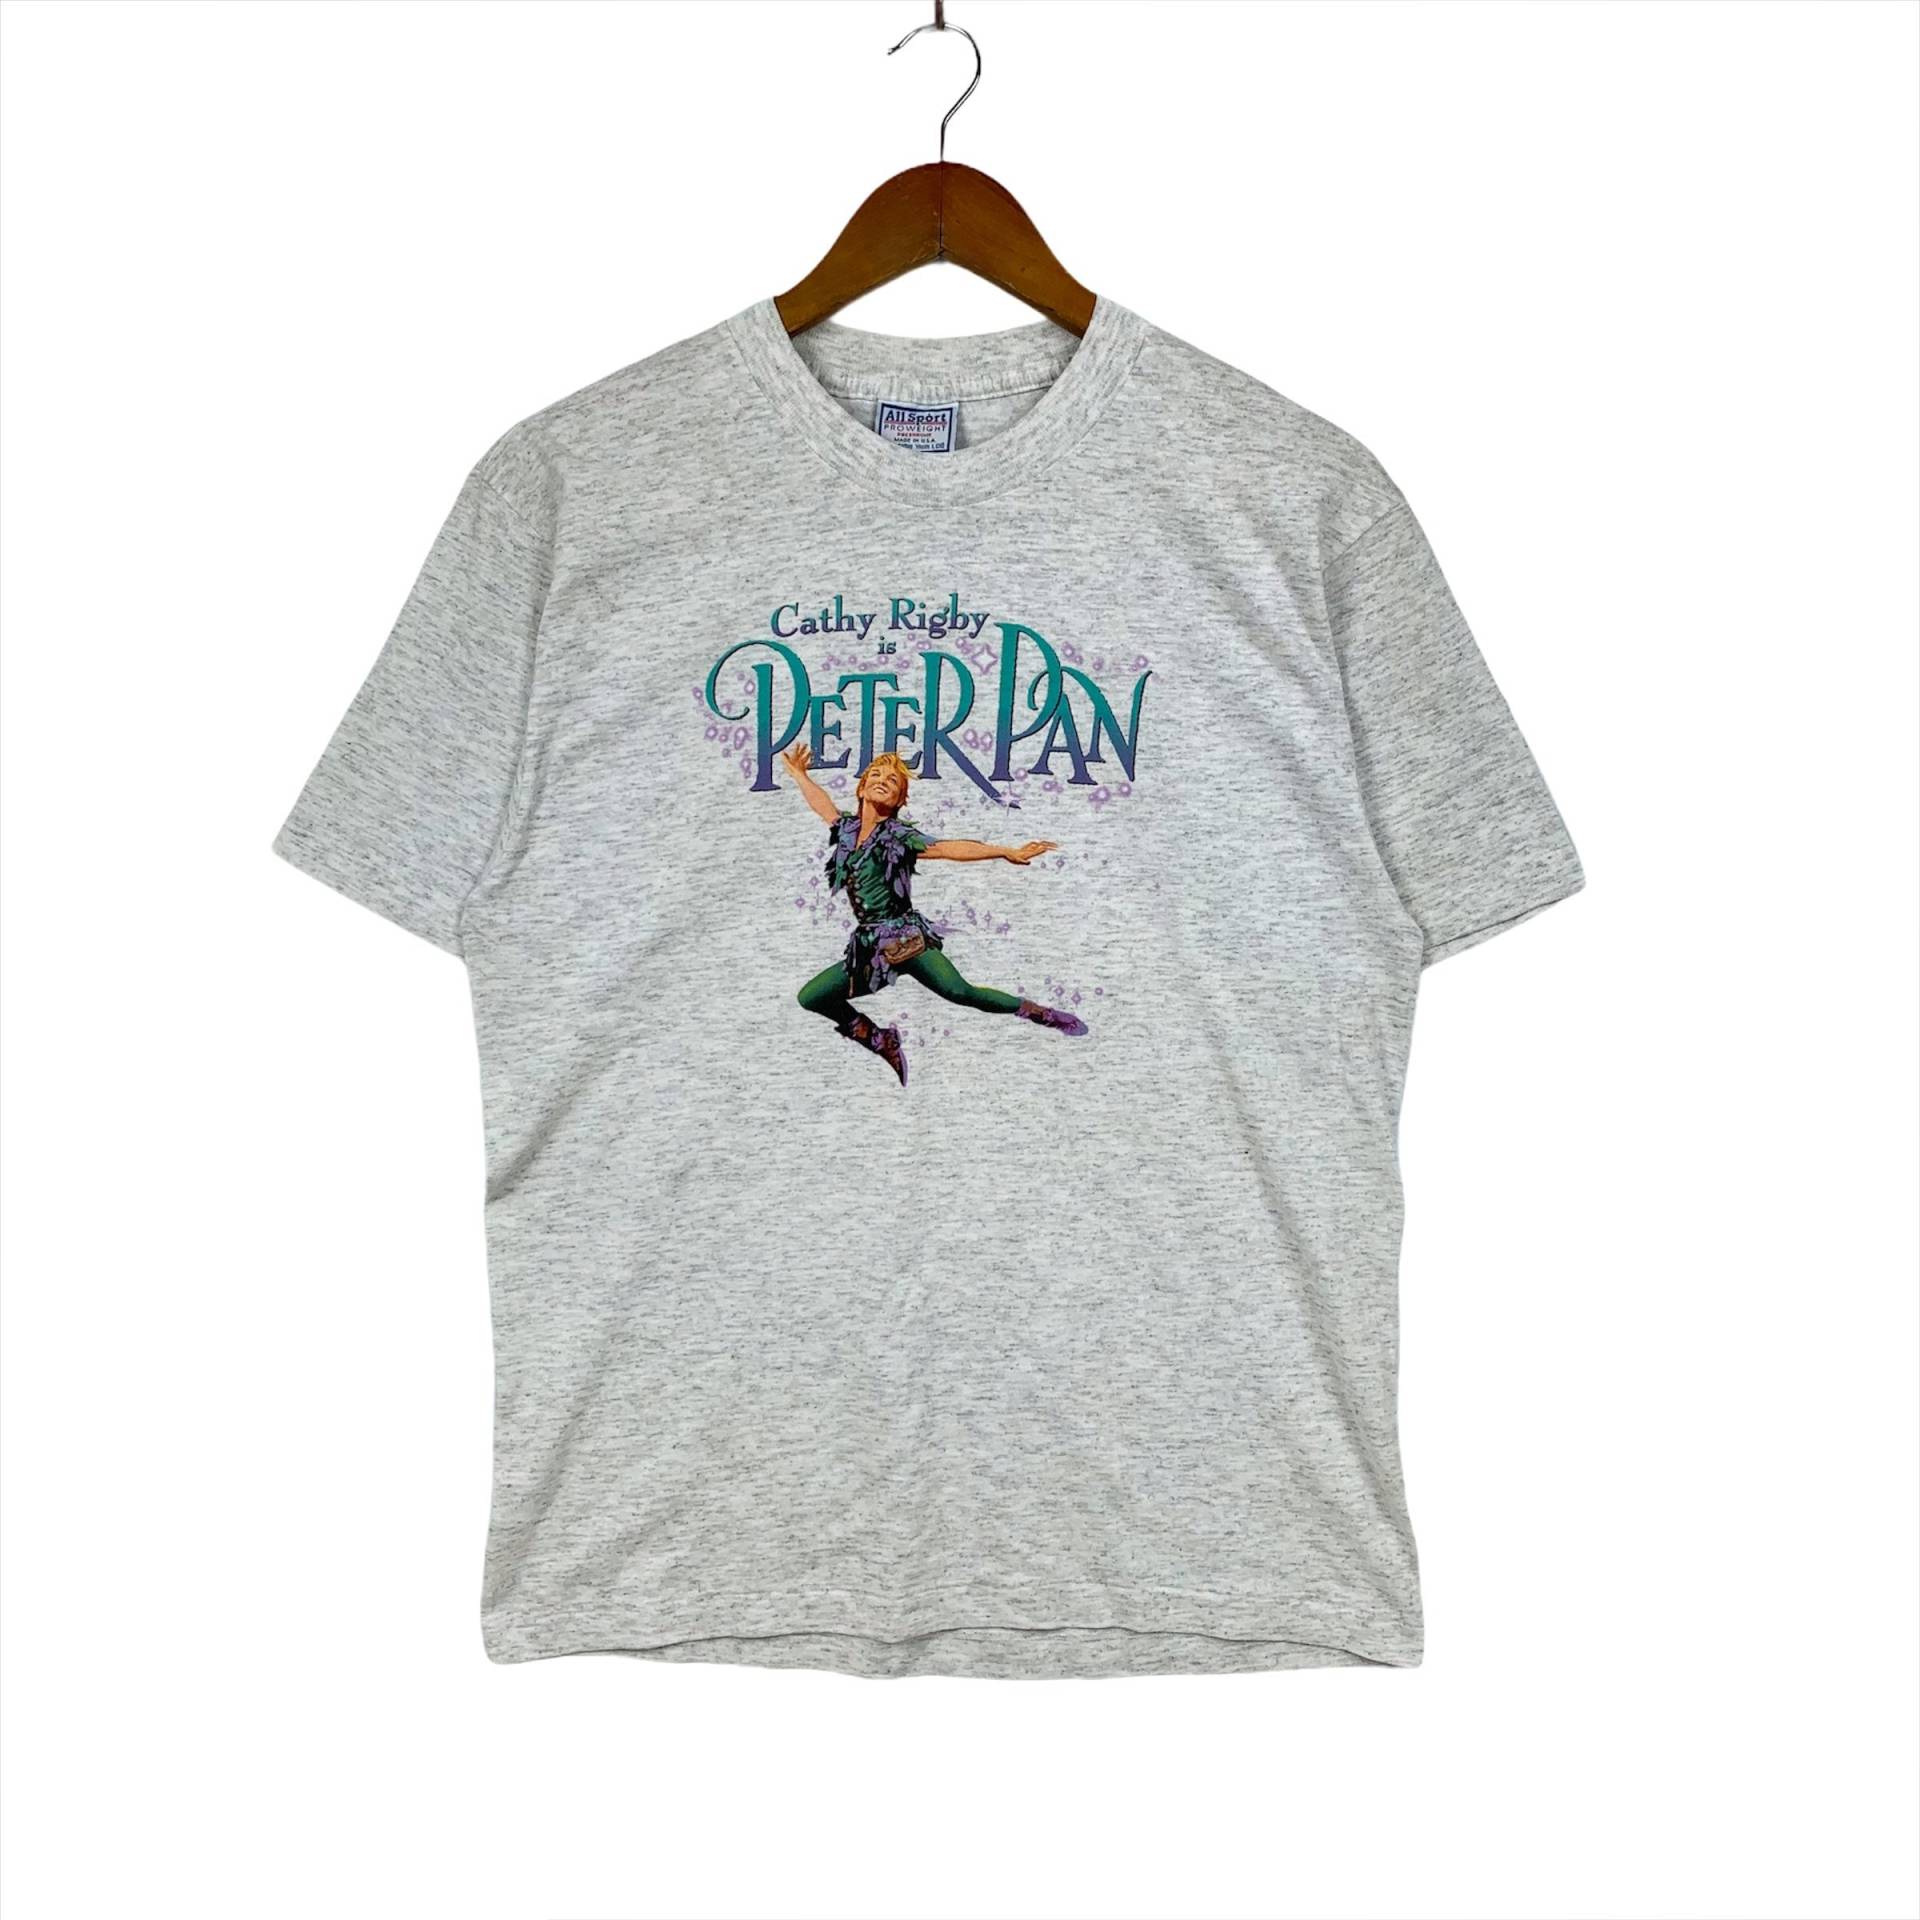 Vintage 90Er Jahre Movie Cathy Rigby Is Peter Pan Tshirt Single Stitch Size On Tag Youth L Fit M-S Men von 43VintageArt